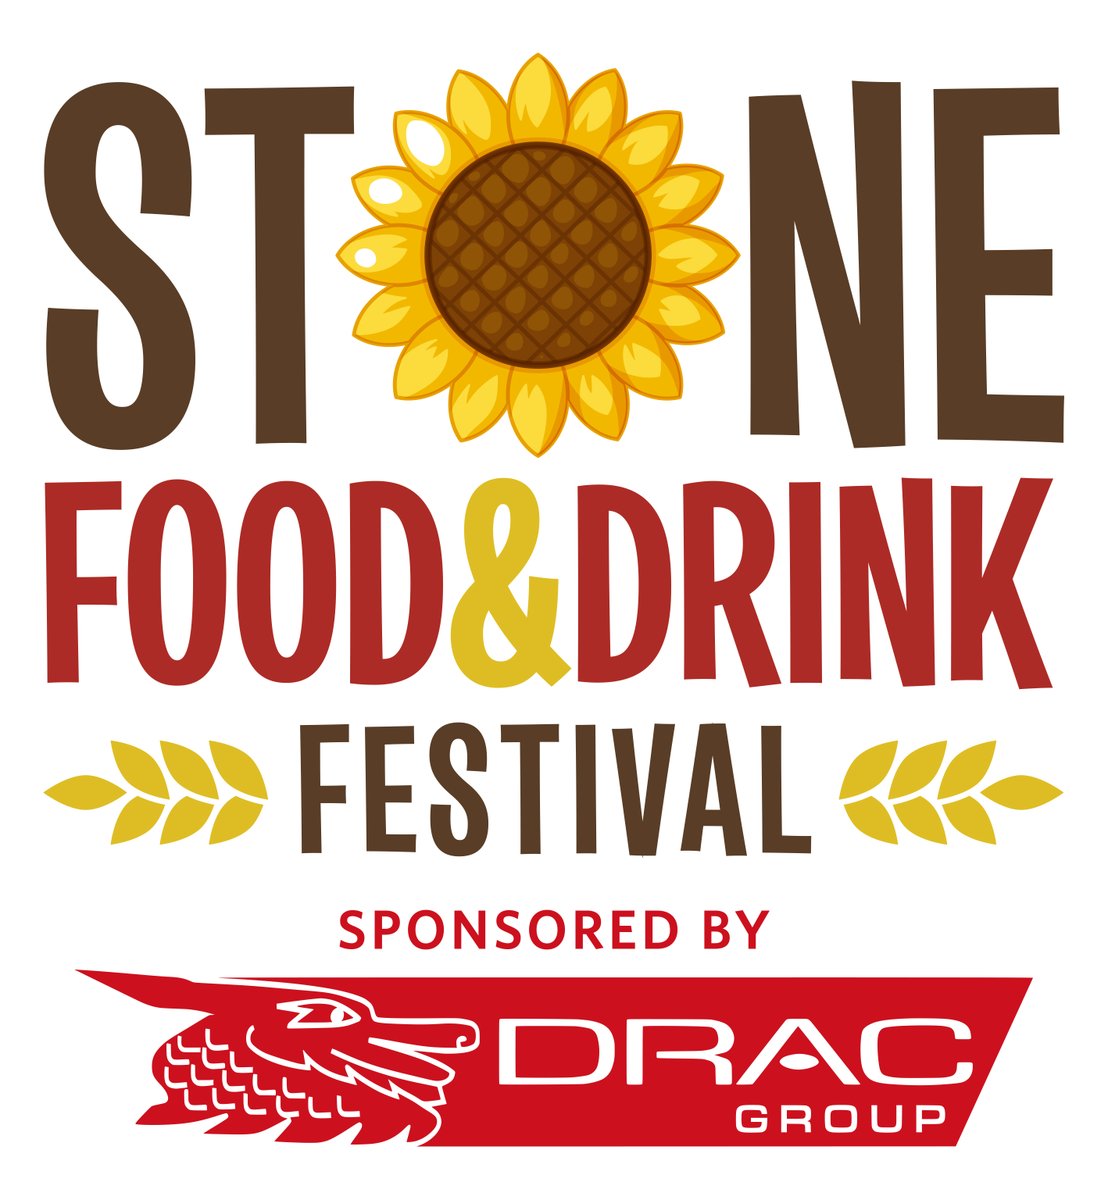 The organisers of @FoodStone are looking for traders for this year's event.

If you specialise in crisps & snacks, kitchen & household equipment, soft drinks, charcuterie or anything unusual, contact the team! 

👉traders@stonefooddrink.org.uk

#EnjoyStaffs #Staffordshire